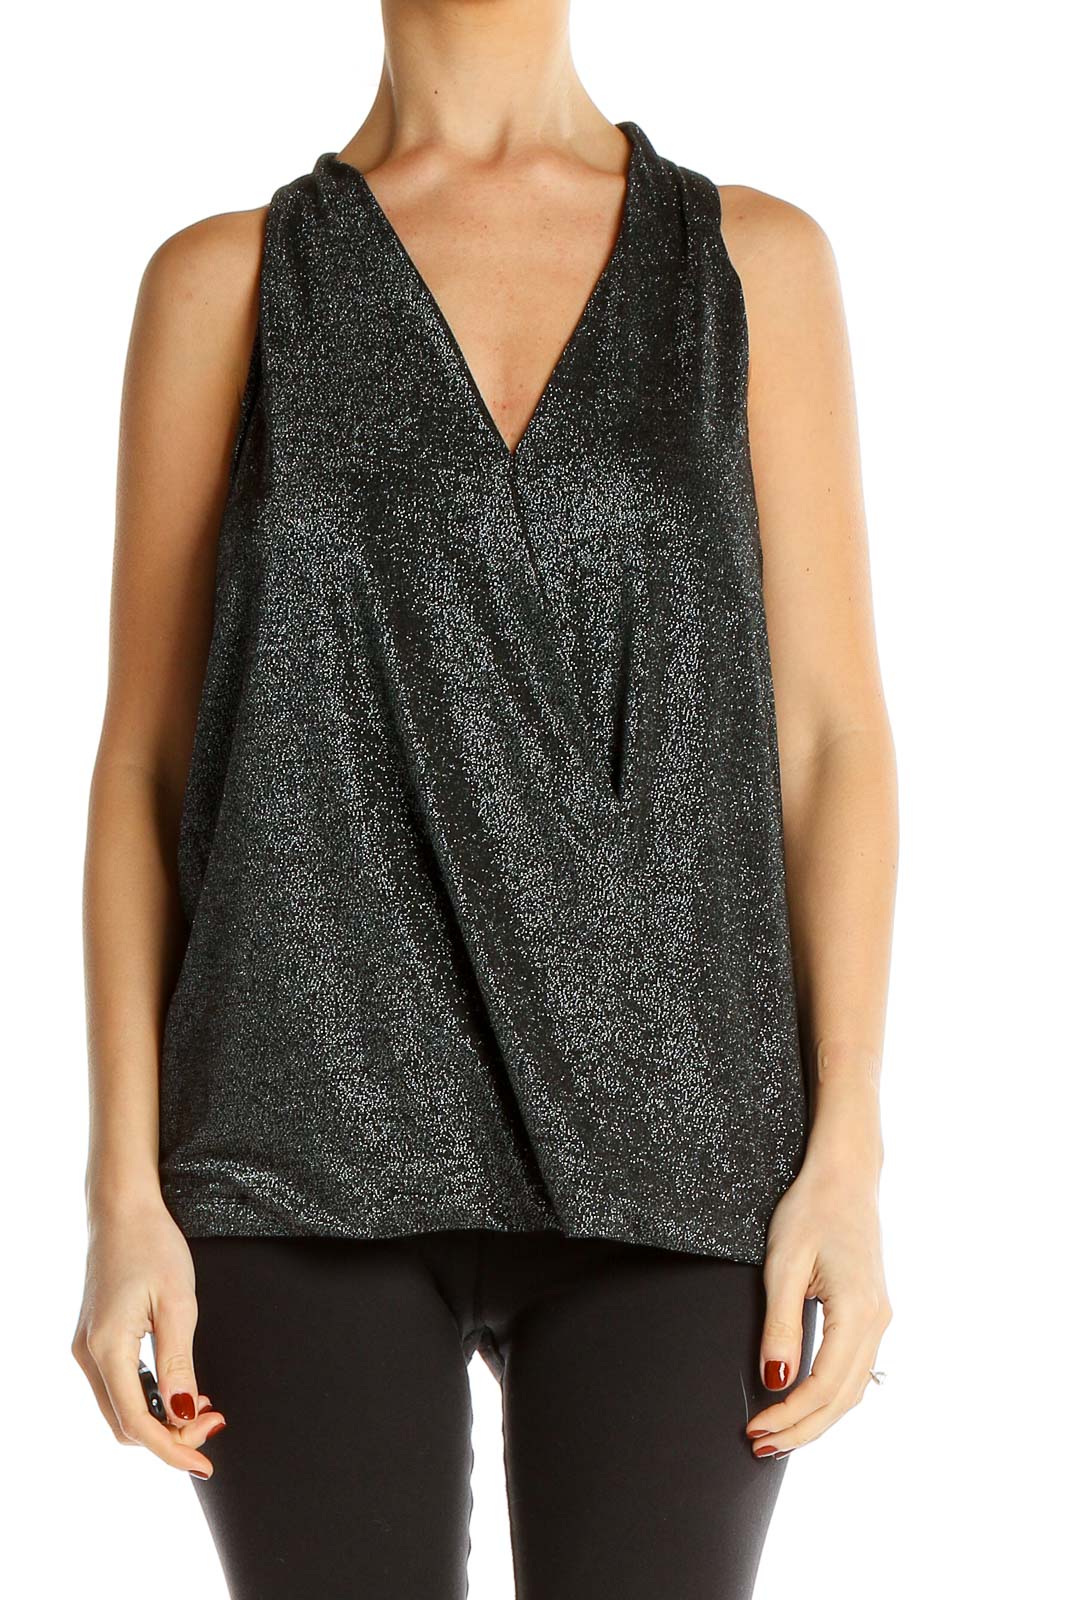 Black Shimmer Party Blouse Front